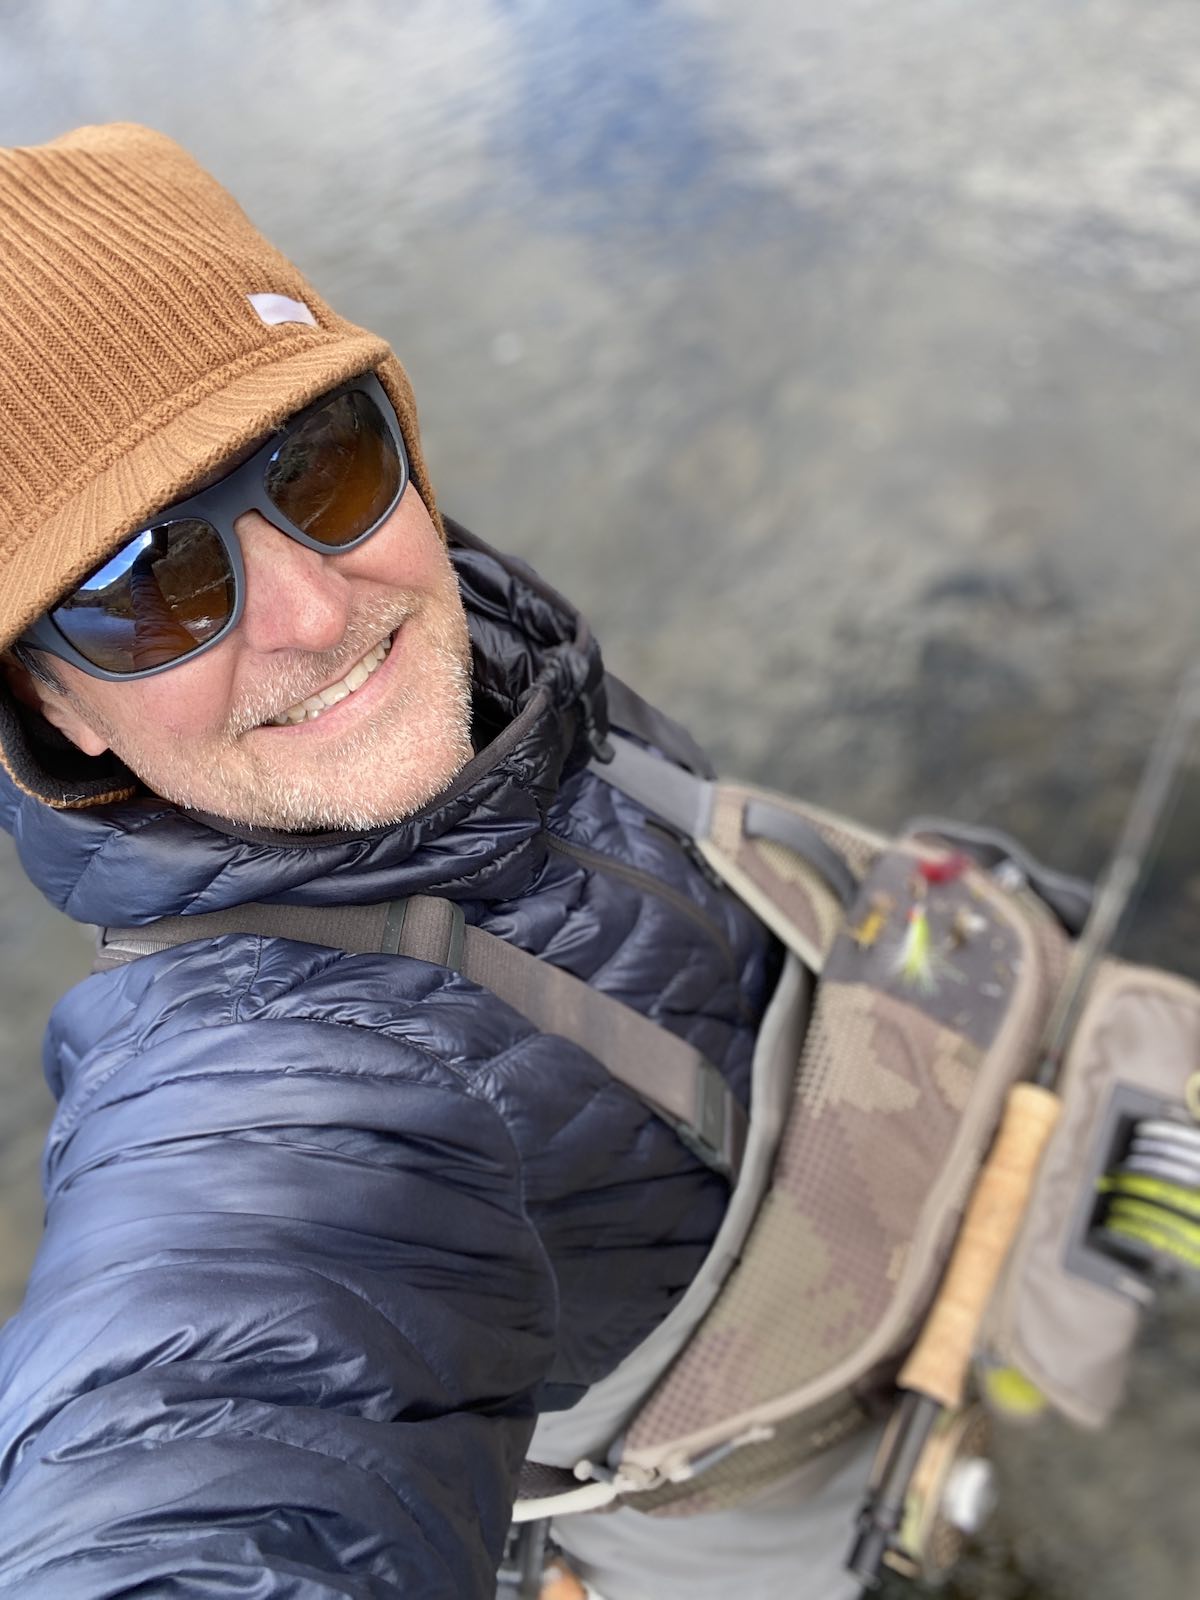 Fly fishing slingpacks reviewed and tested on the water